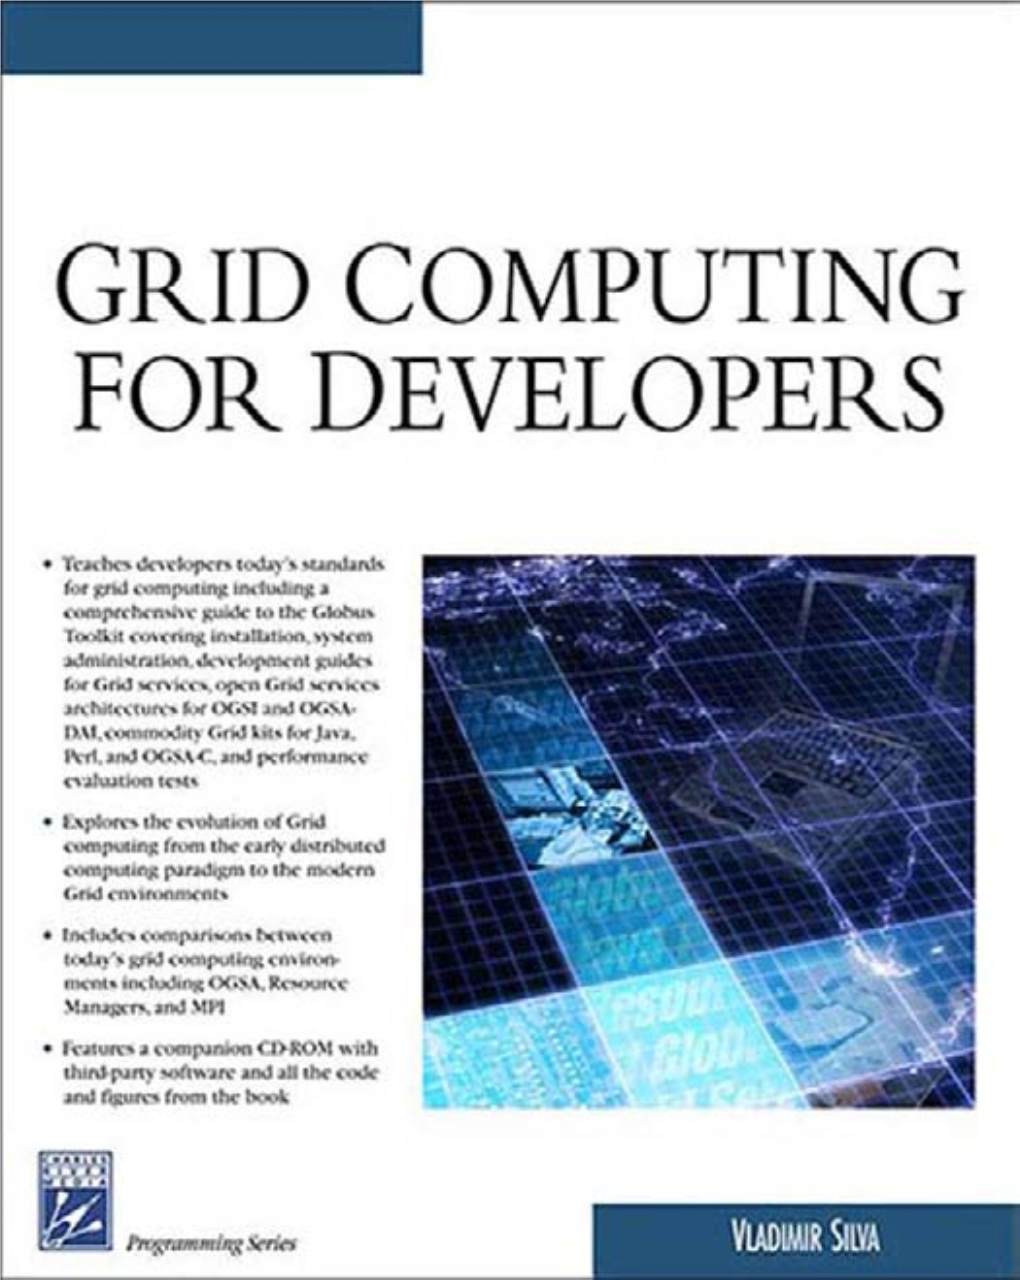 Grid Computing for Developers Limited Warranty and Disclaimer of Liability